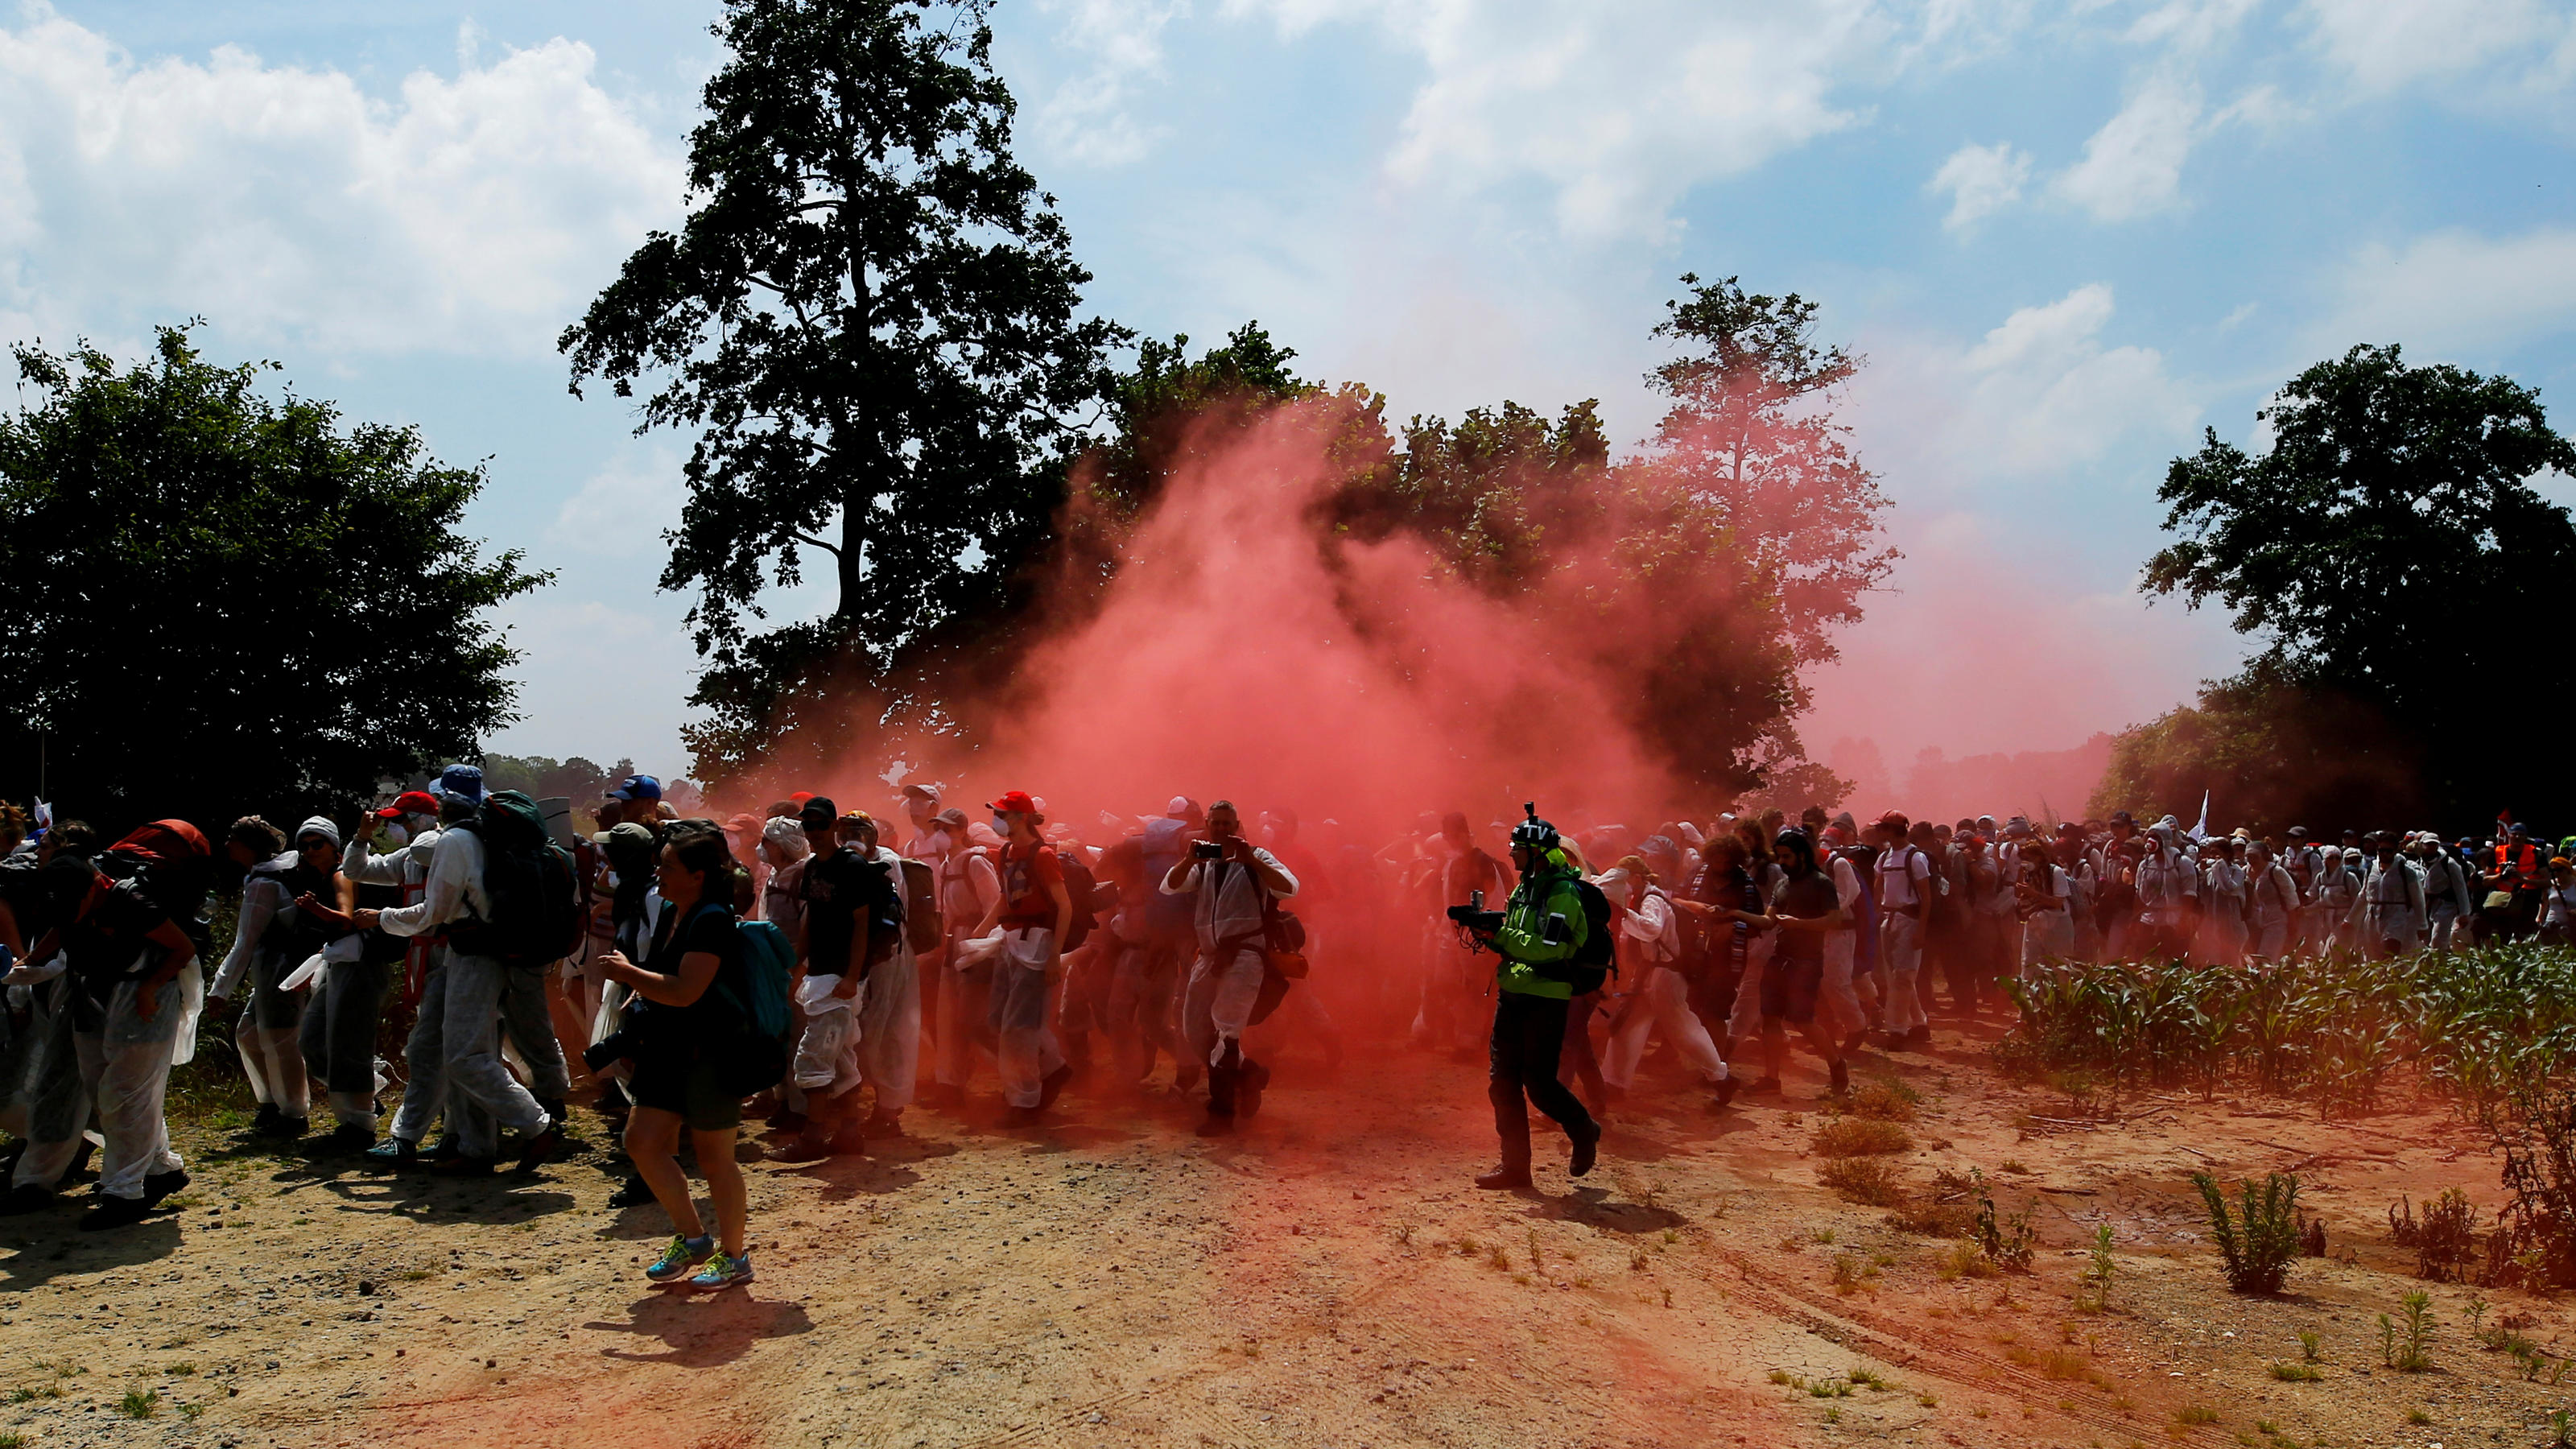 Environmental activists walk amid the red smoke from flares during a protest against the climate change near a pit of Garzweiler open cast brown coal mine near Duesseldorf, Germany June 22, 2019. REUTERS/Thilo Schmuelgen